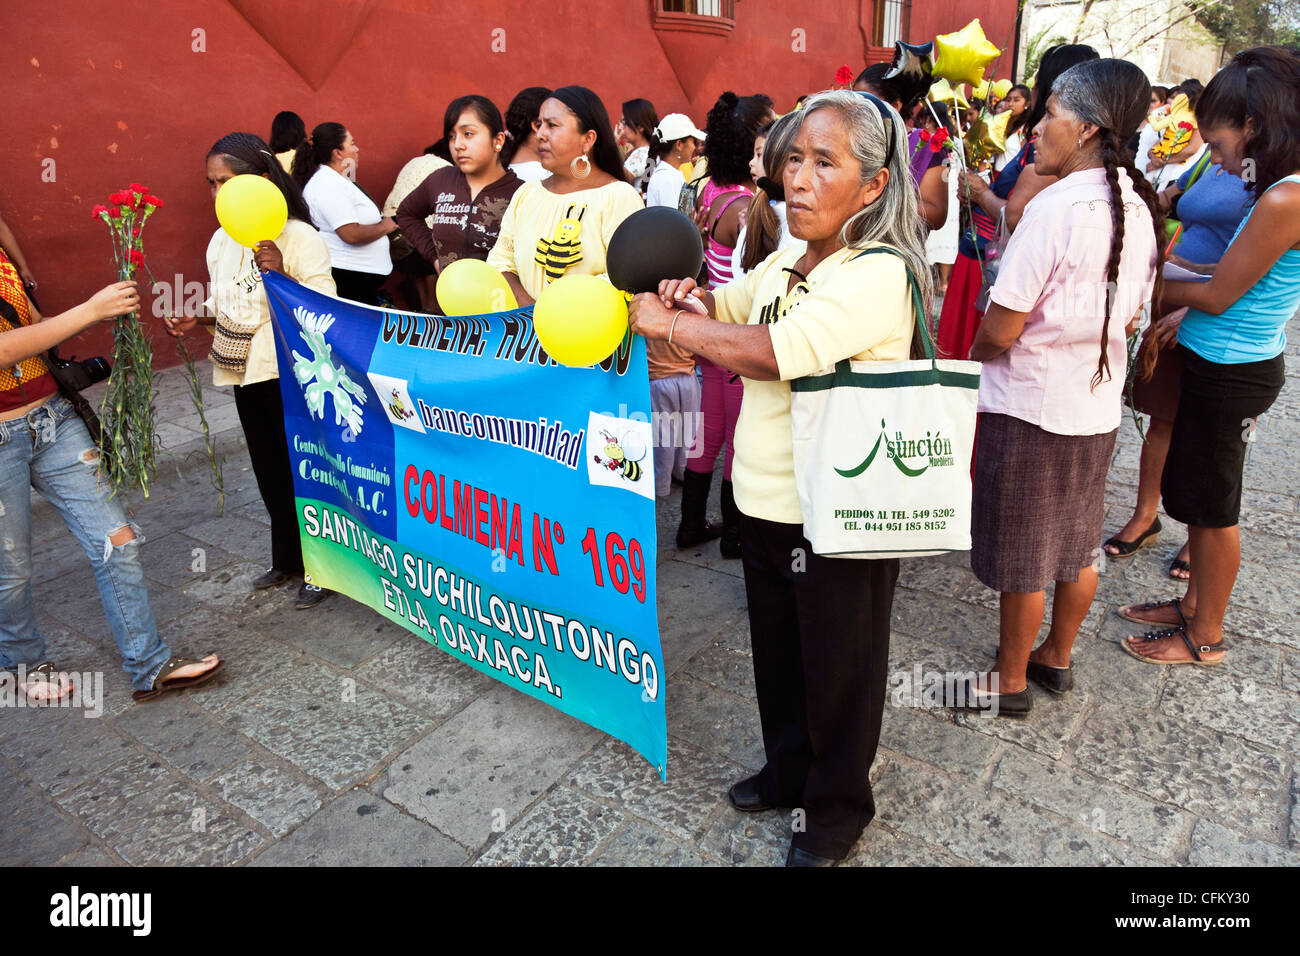 women who have benefitted from microfinance loans gather to celebrate 10th anniversary of Bancomunidad with march down Alcala Stock Photo